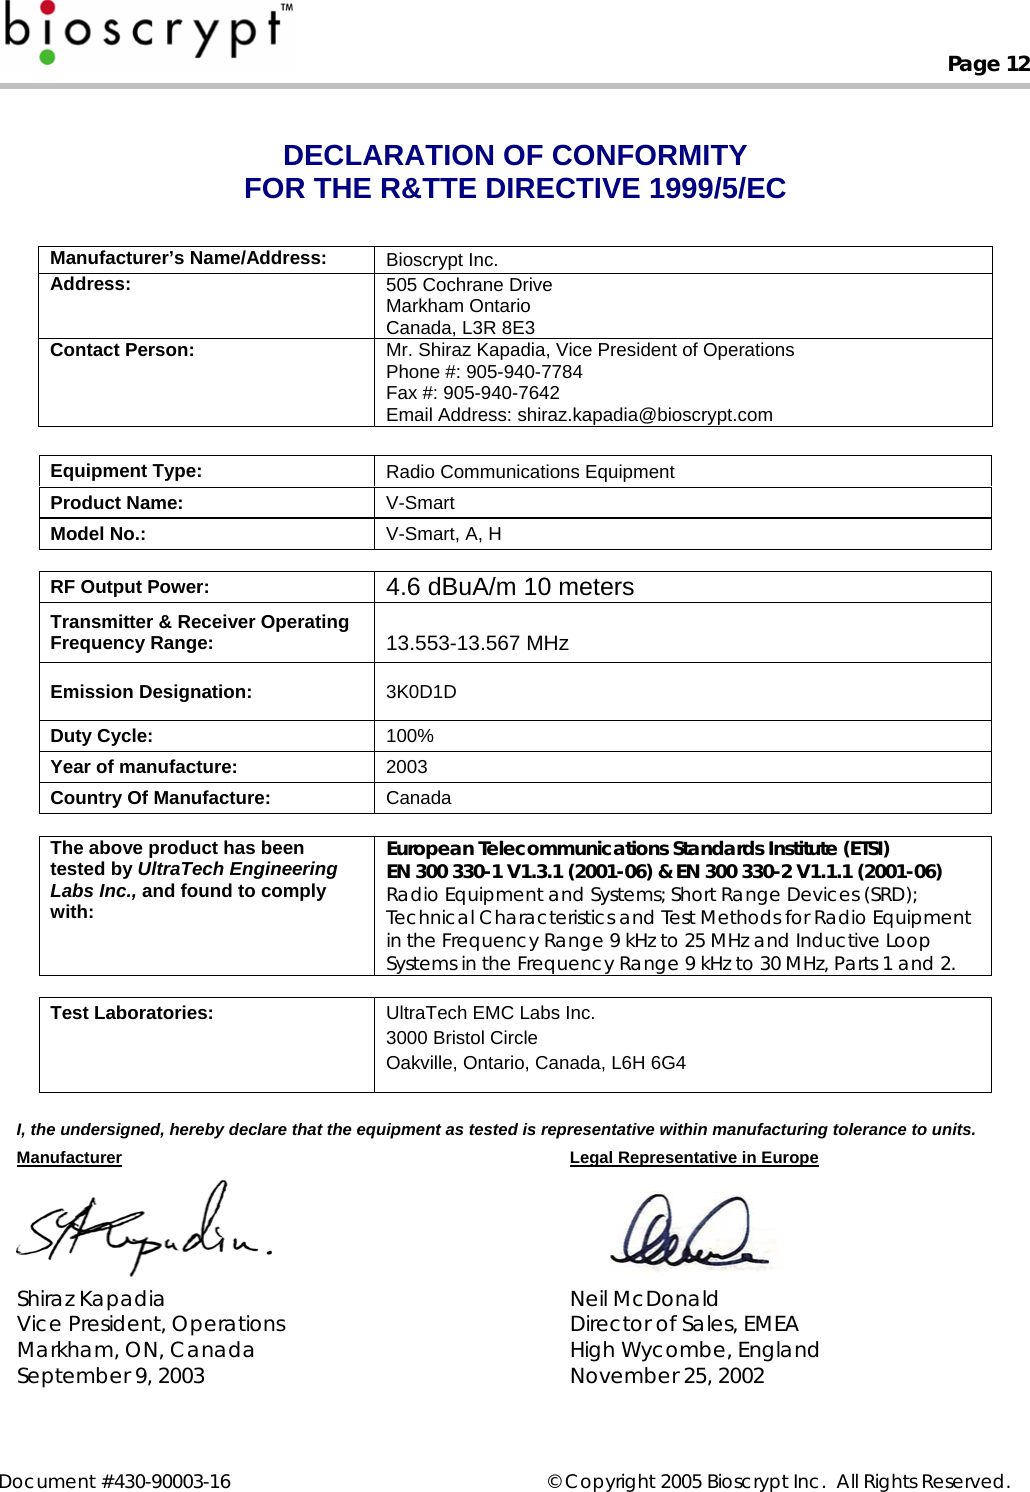  Page 12   Document #430-90003-16    © Copyright 2005 Bioscrypt Inc.  All Rights Reserved. DECLARATION OF CONFORMITY FOR THE R&amp;TTE DIRECTIVE 1999/5/EC   Manufacturer’s Name/Address:  Bioscrypt Inc. Address:   505 Cochrane Drive Markham Ontario Canada, L3R 8E3 Contact Person:  Mr. Shiraz Kapadia, Vice President of Operations Phone #: 905-940-7784 Fax #: 905-940-7642 Email Address: shiraz.kapadia@bioscrypt.com  Equipment Type:  Radio Communications Equipment Product Name:  V-Smart Model No.:  V-Smart, A, H   RF Output Power:  4.6 dBuA/m 10 meters Transmitter &amp; Receiver Operating Frequency Range:   13.553-13.567 MHz Emission Designation:  3K0D1D Duty Cycle:  100% Year of manufacture:  2003 Country Of Manufacture:  Canada  The above product has been tested by UltraTech Engineering Labs Inc., and found to comply with: European Telecommunications Standards Institute (ETSI) EN 300 330-1 V1.3.1 (2001-06) &amp; EN 300 330-2 V1.1.1 (2001-06) Radio Equipment and Systems; Short Range Devices (SRD); Technical Characteristics and Test Methods for Radio Equipment in the Frequency Range 9 kHz to 25 MHz and Inductive Loop Systems in the Frequency Range 9 kHz to 30 MHz, Parts 1 and 2.  Test Laboratories:  UltraTech EMC Labs Inc. 3000 Bristol Circle Oakville, Ontario, Canada, L6H 6G4  I, the undersigned, hereby declare that the equipment as tested is representative within manufacturing tolerance to units. Manufacturer Legal Representative in Europe   Shiraz Kapadia  Neil McDonald Vice President, Operations  Director of Sales, EMEA Markham, ON, Canada  High Wycombe, England September 9, 2003  November 25, 2002  